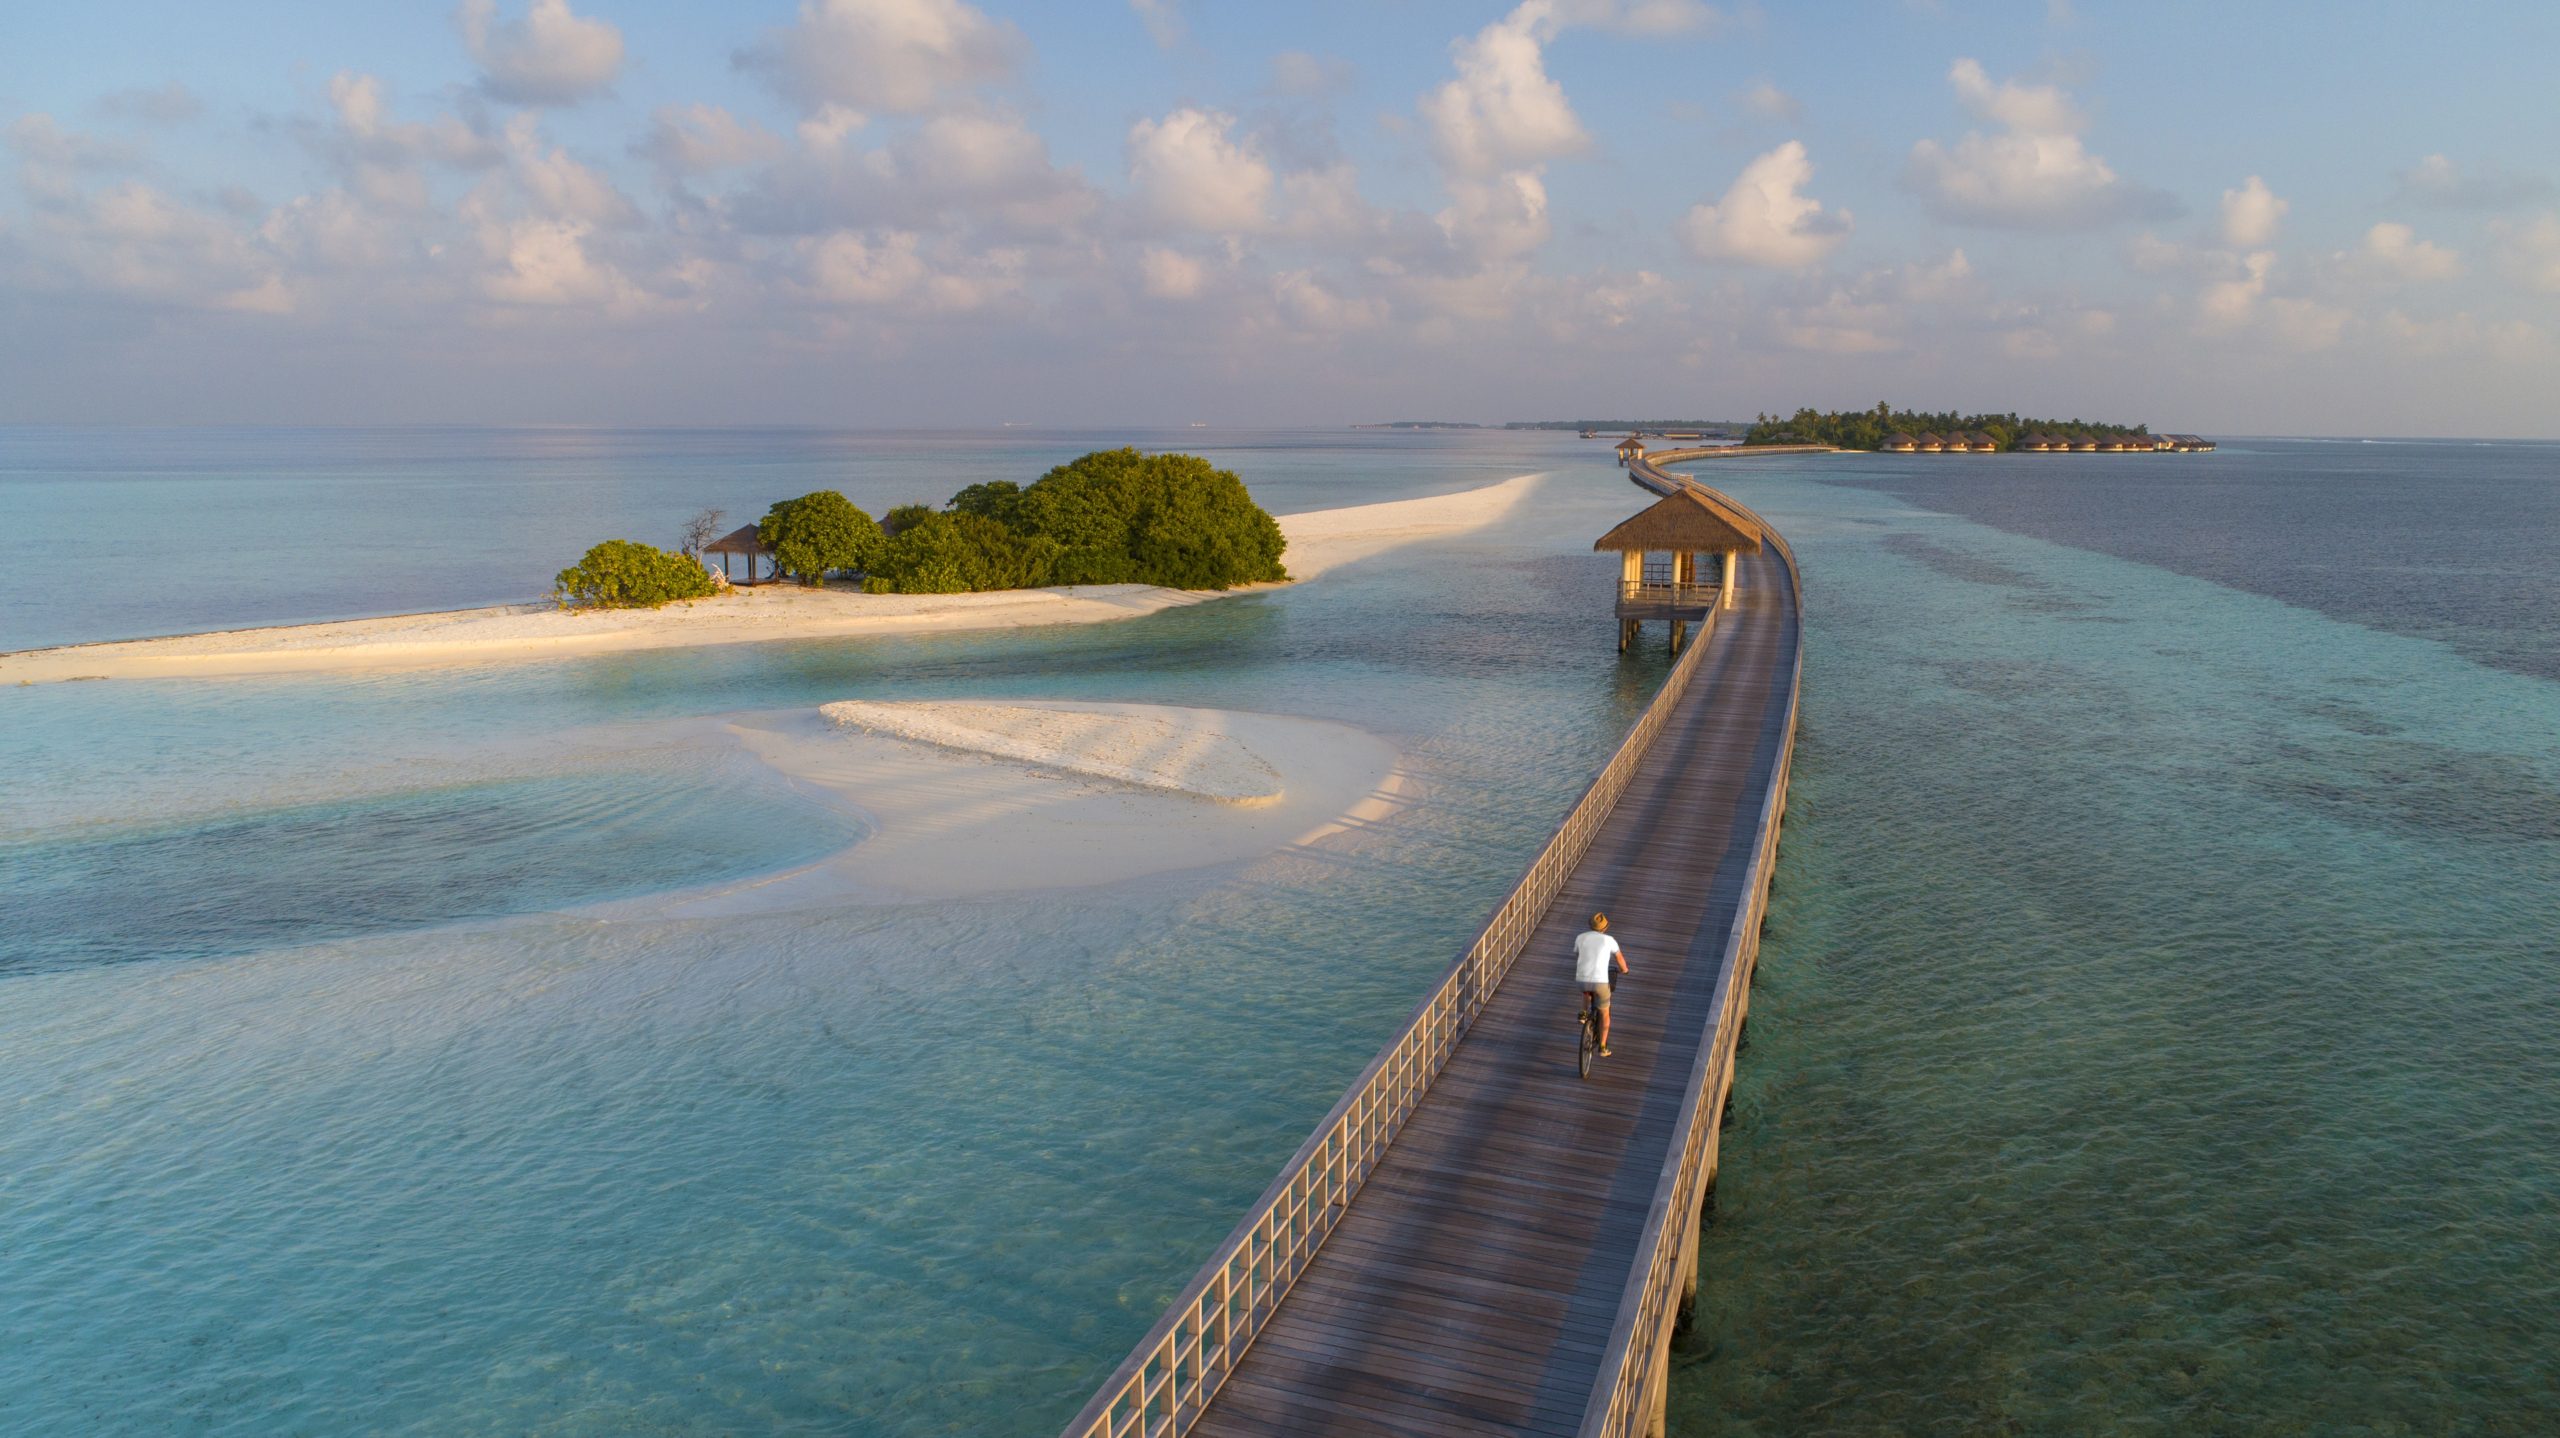 The Residence Maldives's bridge that connects the two resorts